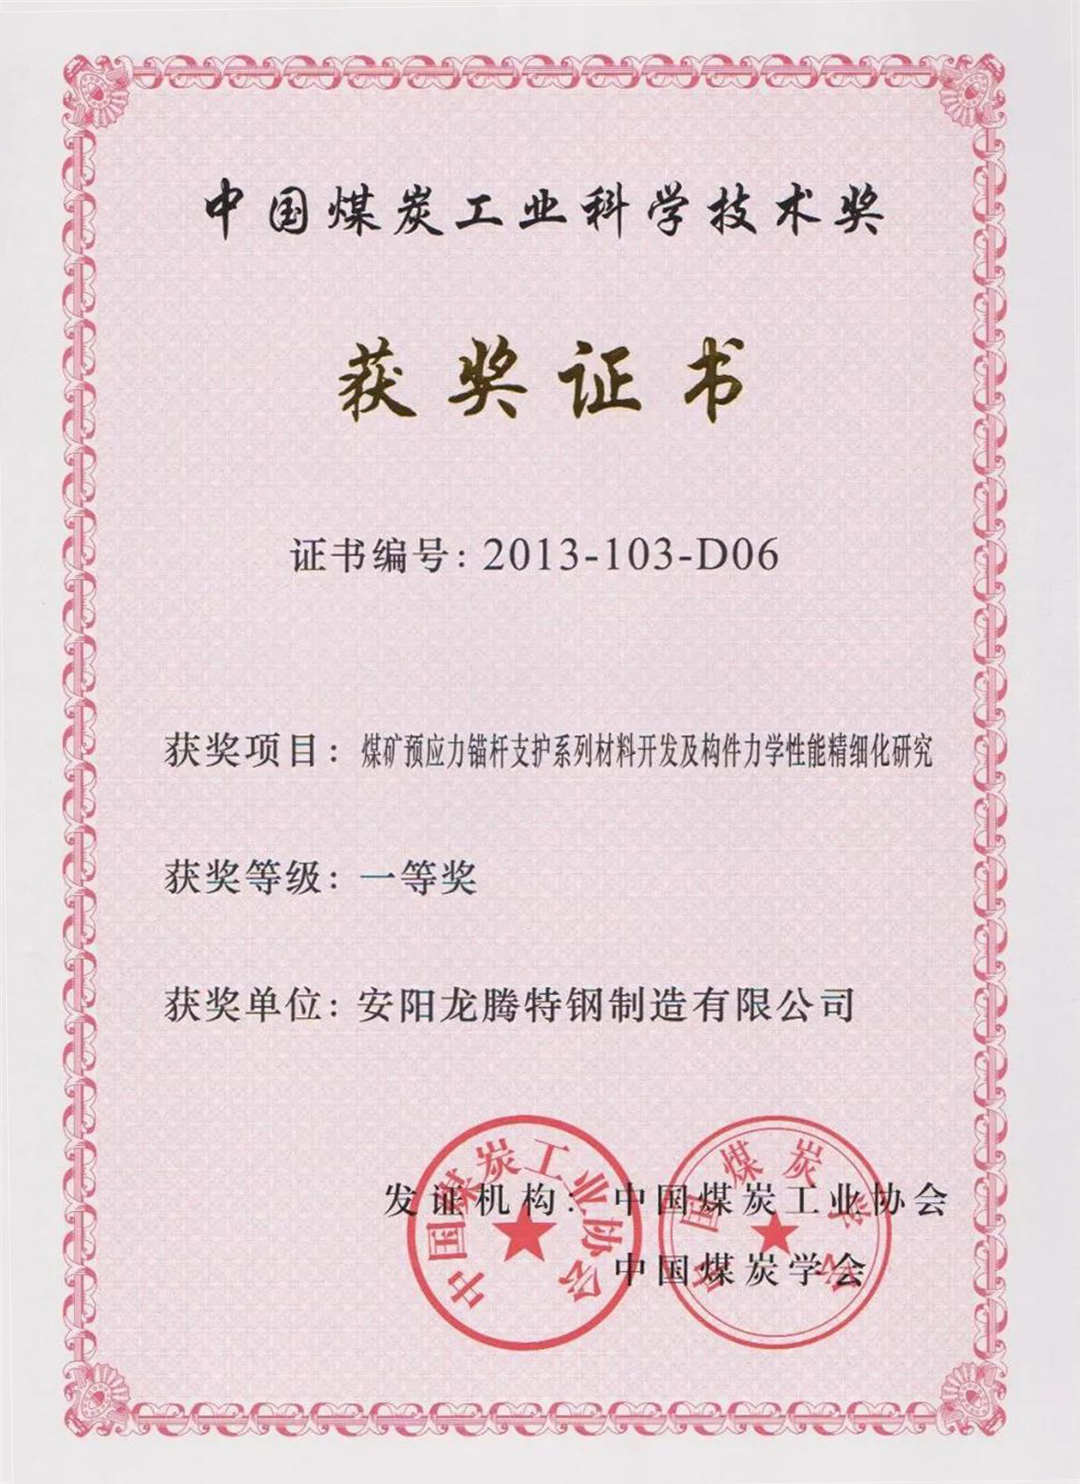 Award Certificate of China Coal Industry Science and Technology Award